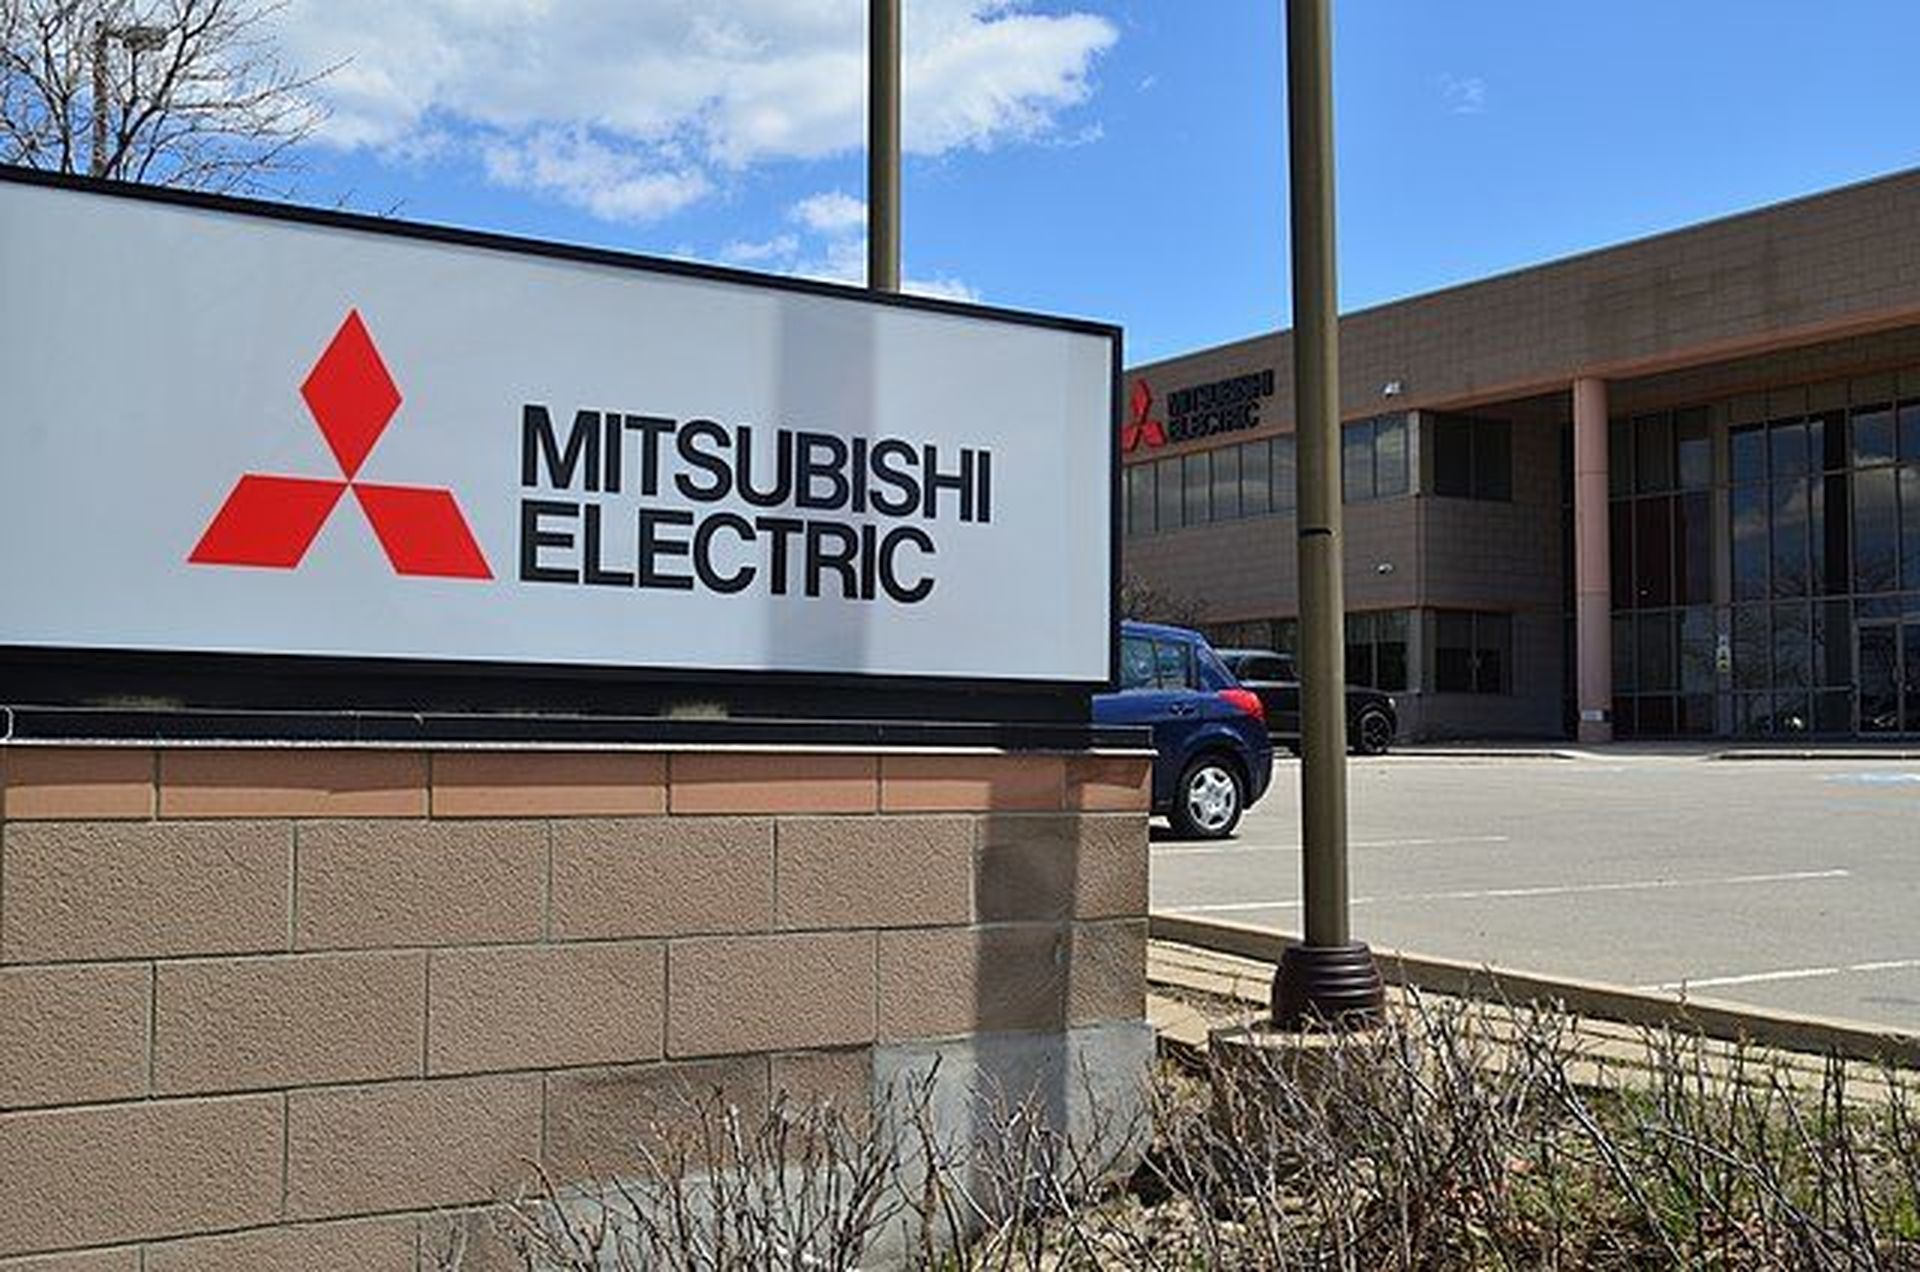 A Mitsubishi Electric office building in Markham, Canada. Researchers detailed five vulnerabilities impacting safety programmable logic controllers that let an attacker view and use the username and password to authenticate themselves. (Credit: Wikimedia Commons)